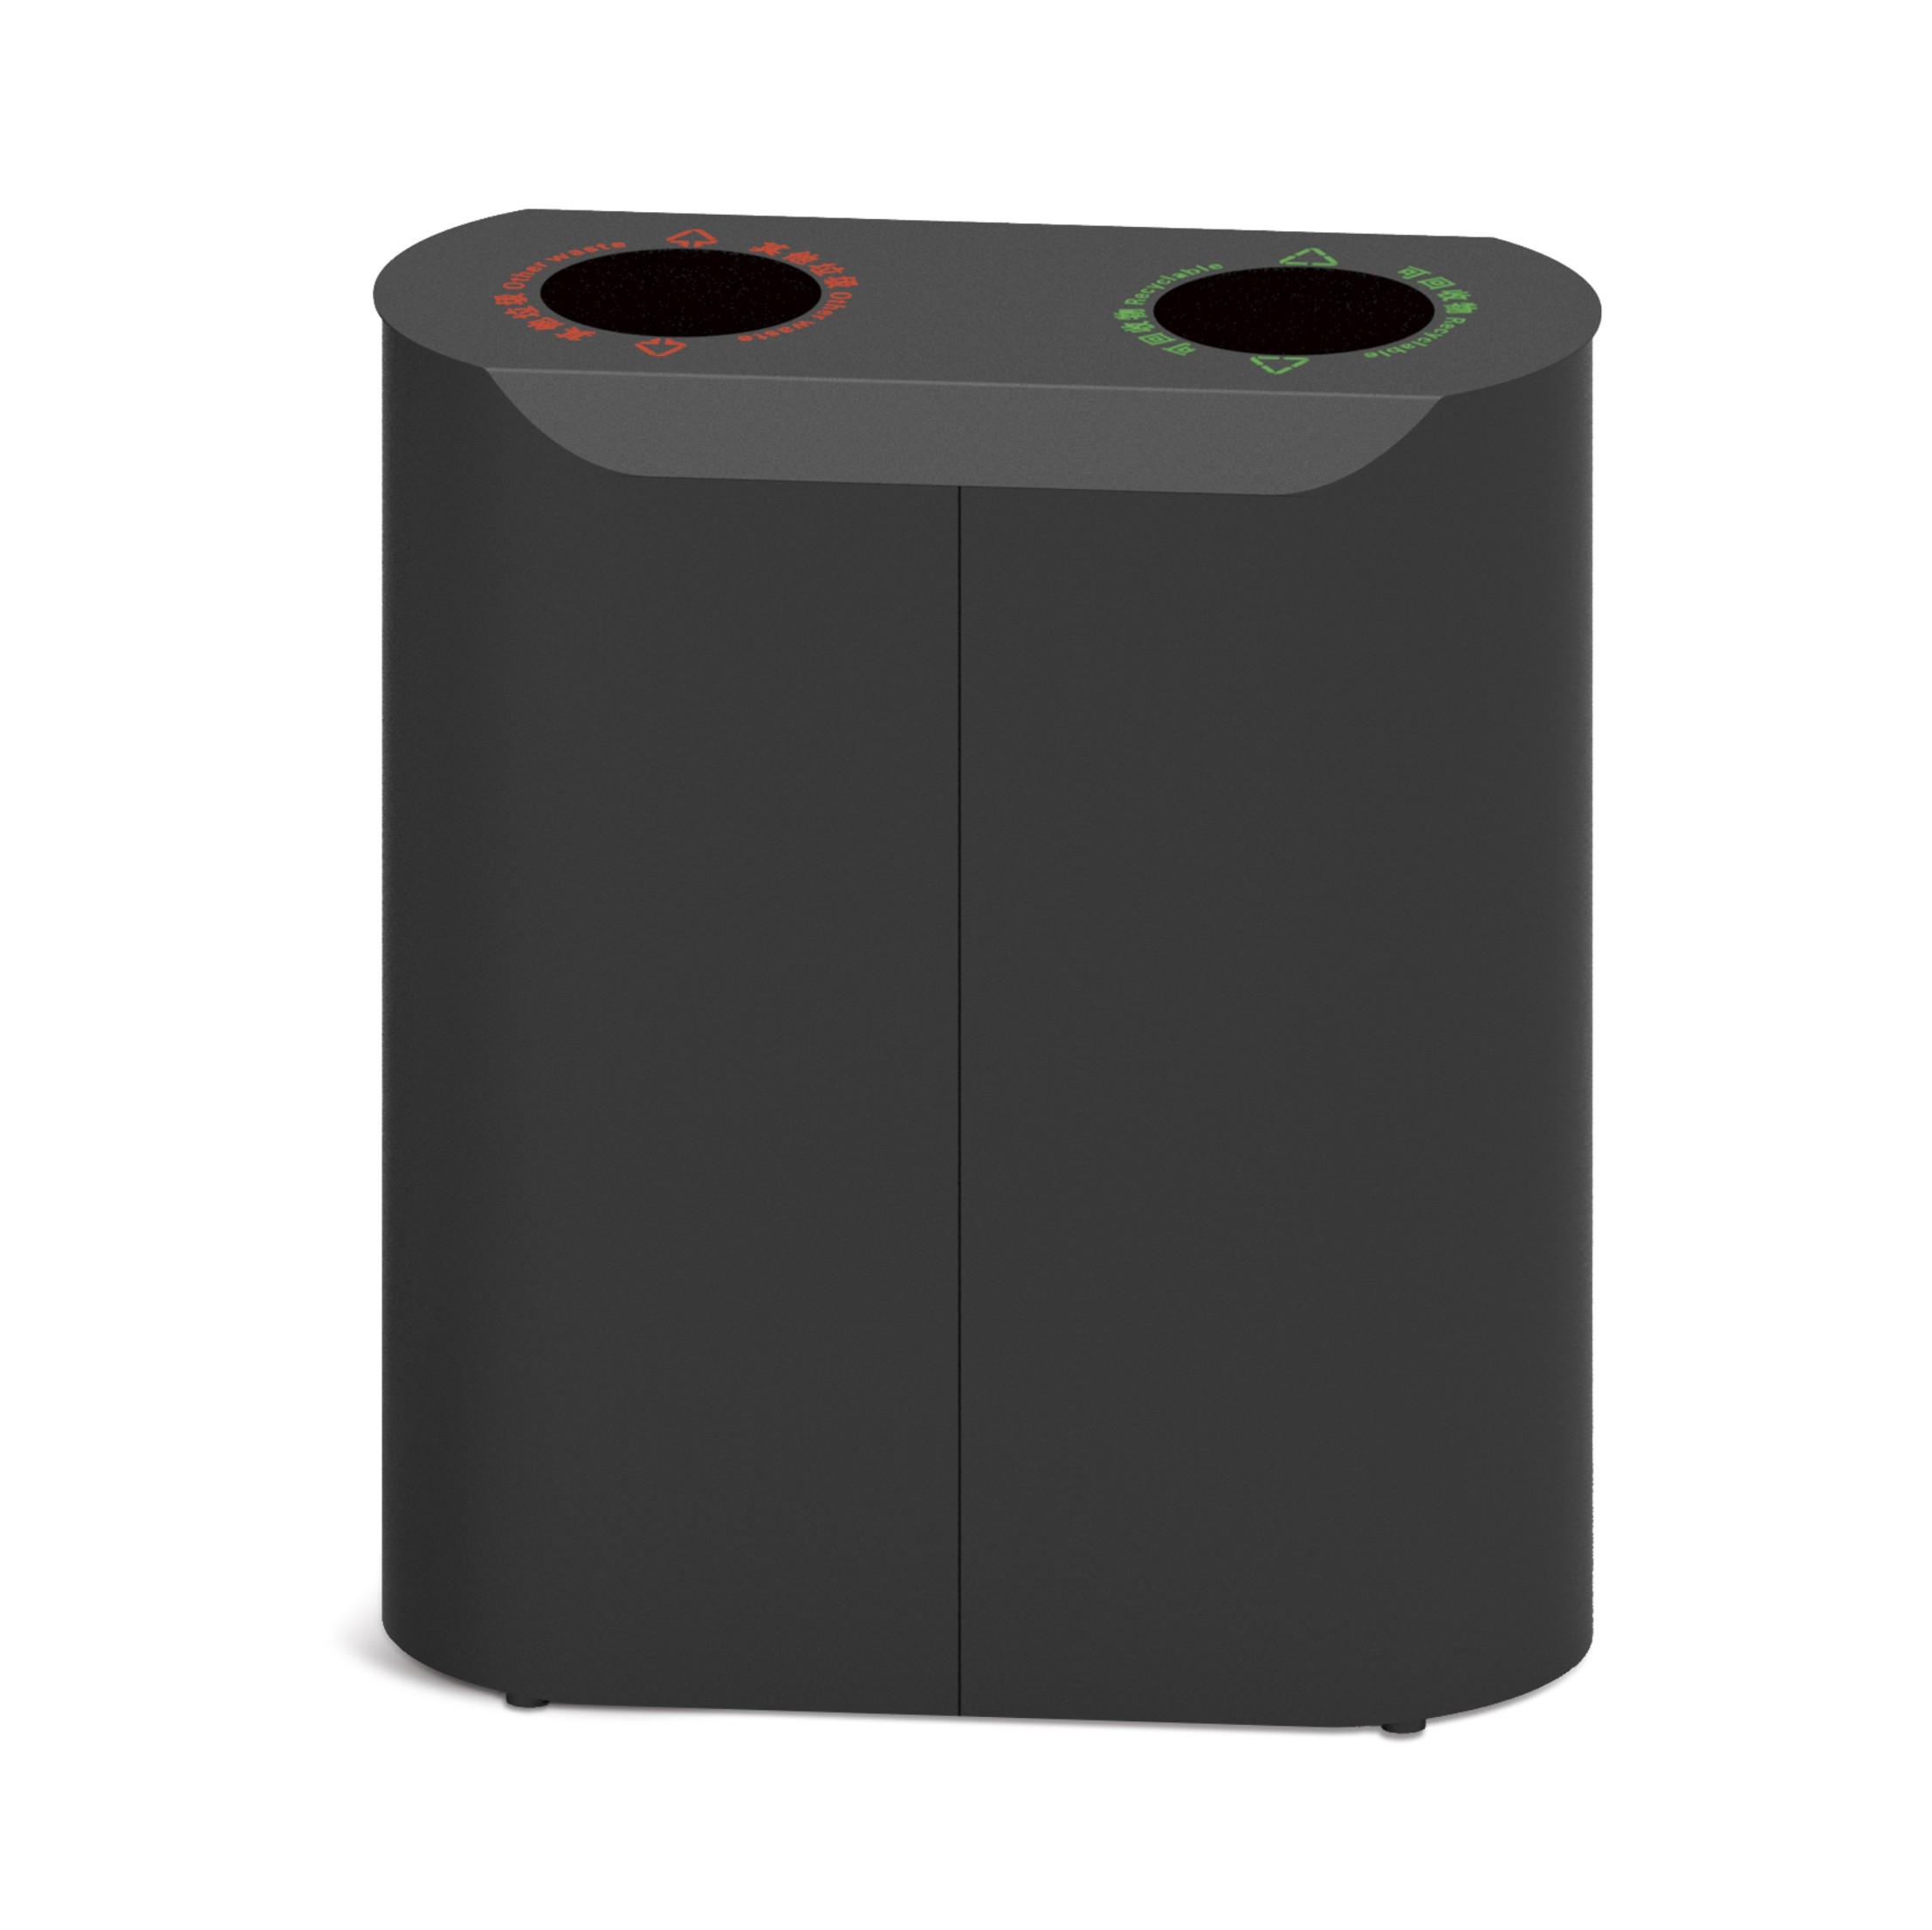 The Classified Trash Can for Garden HW-512